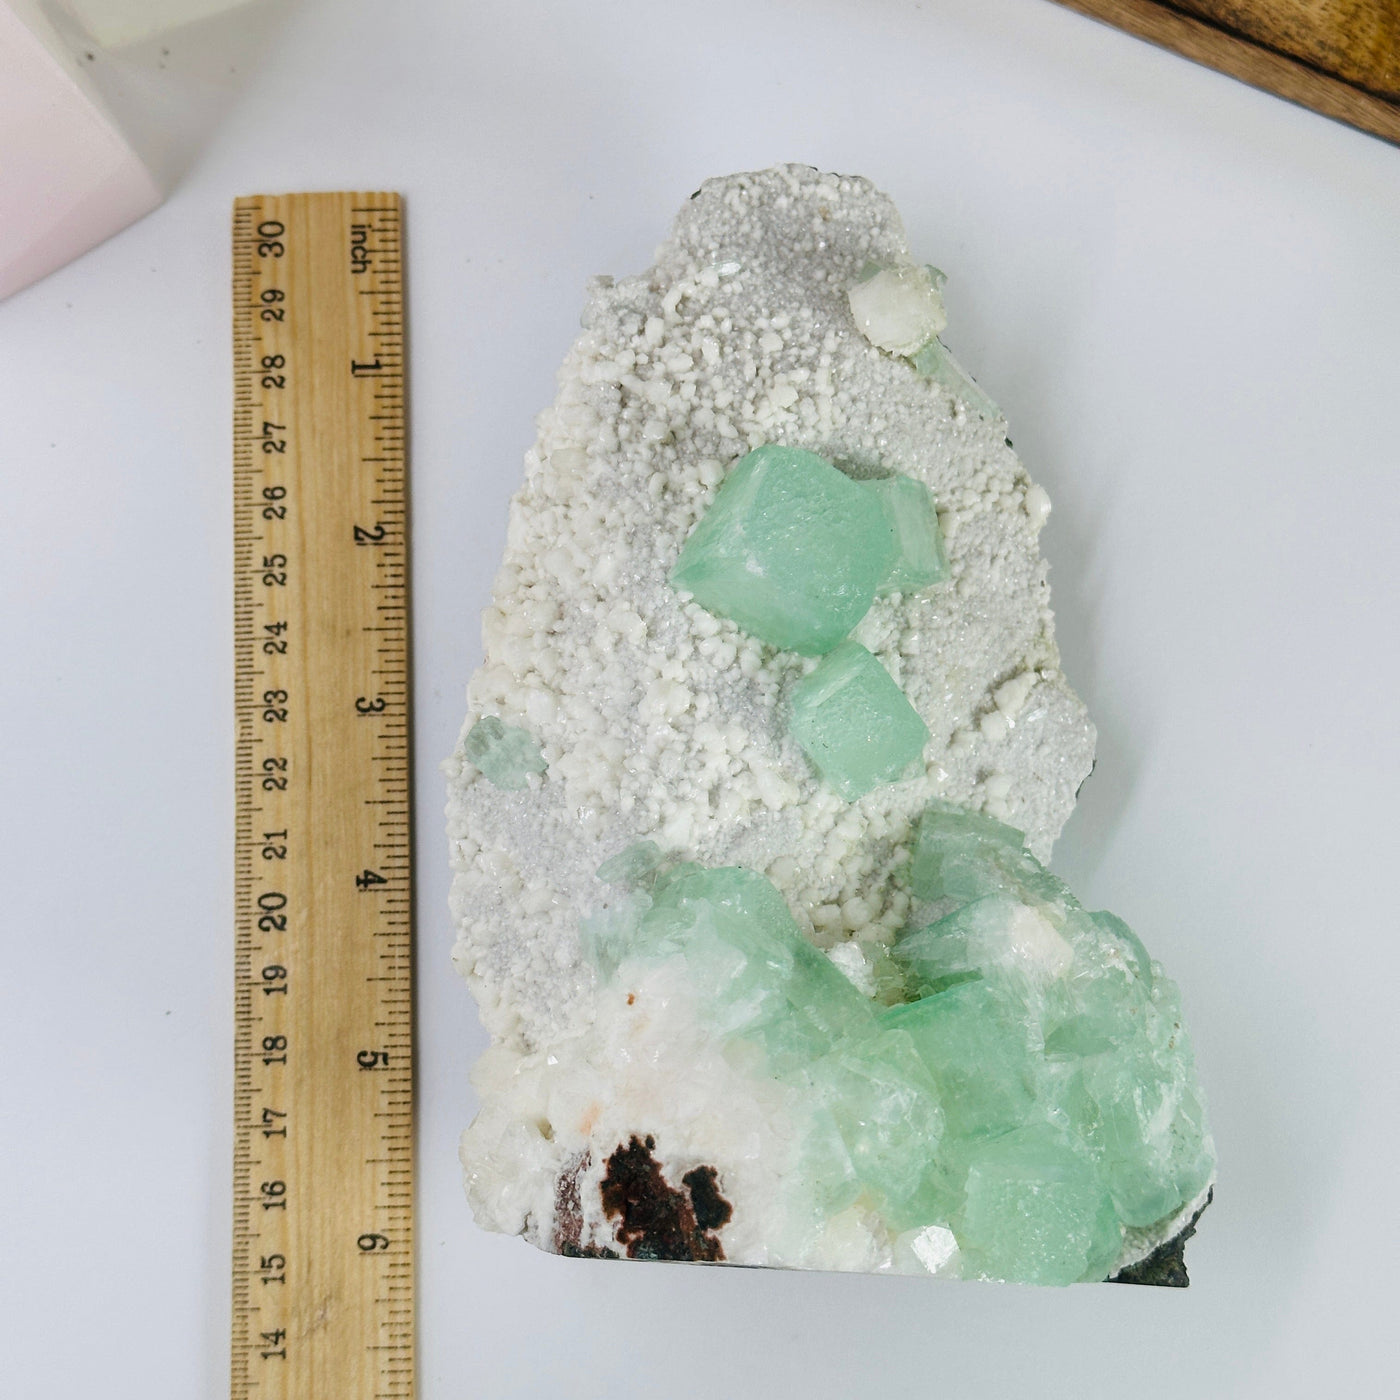 apophyllite cut base next to a ruler for size reference